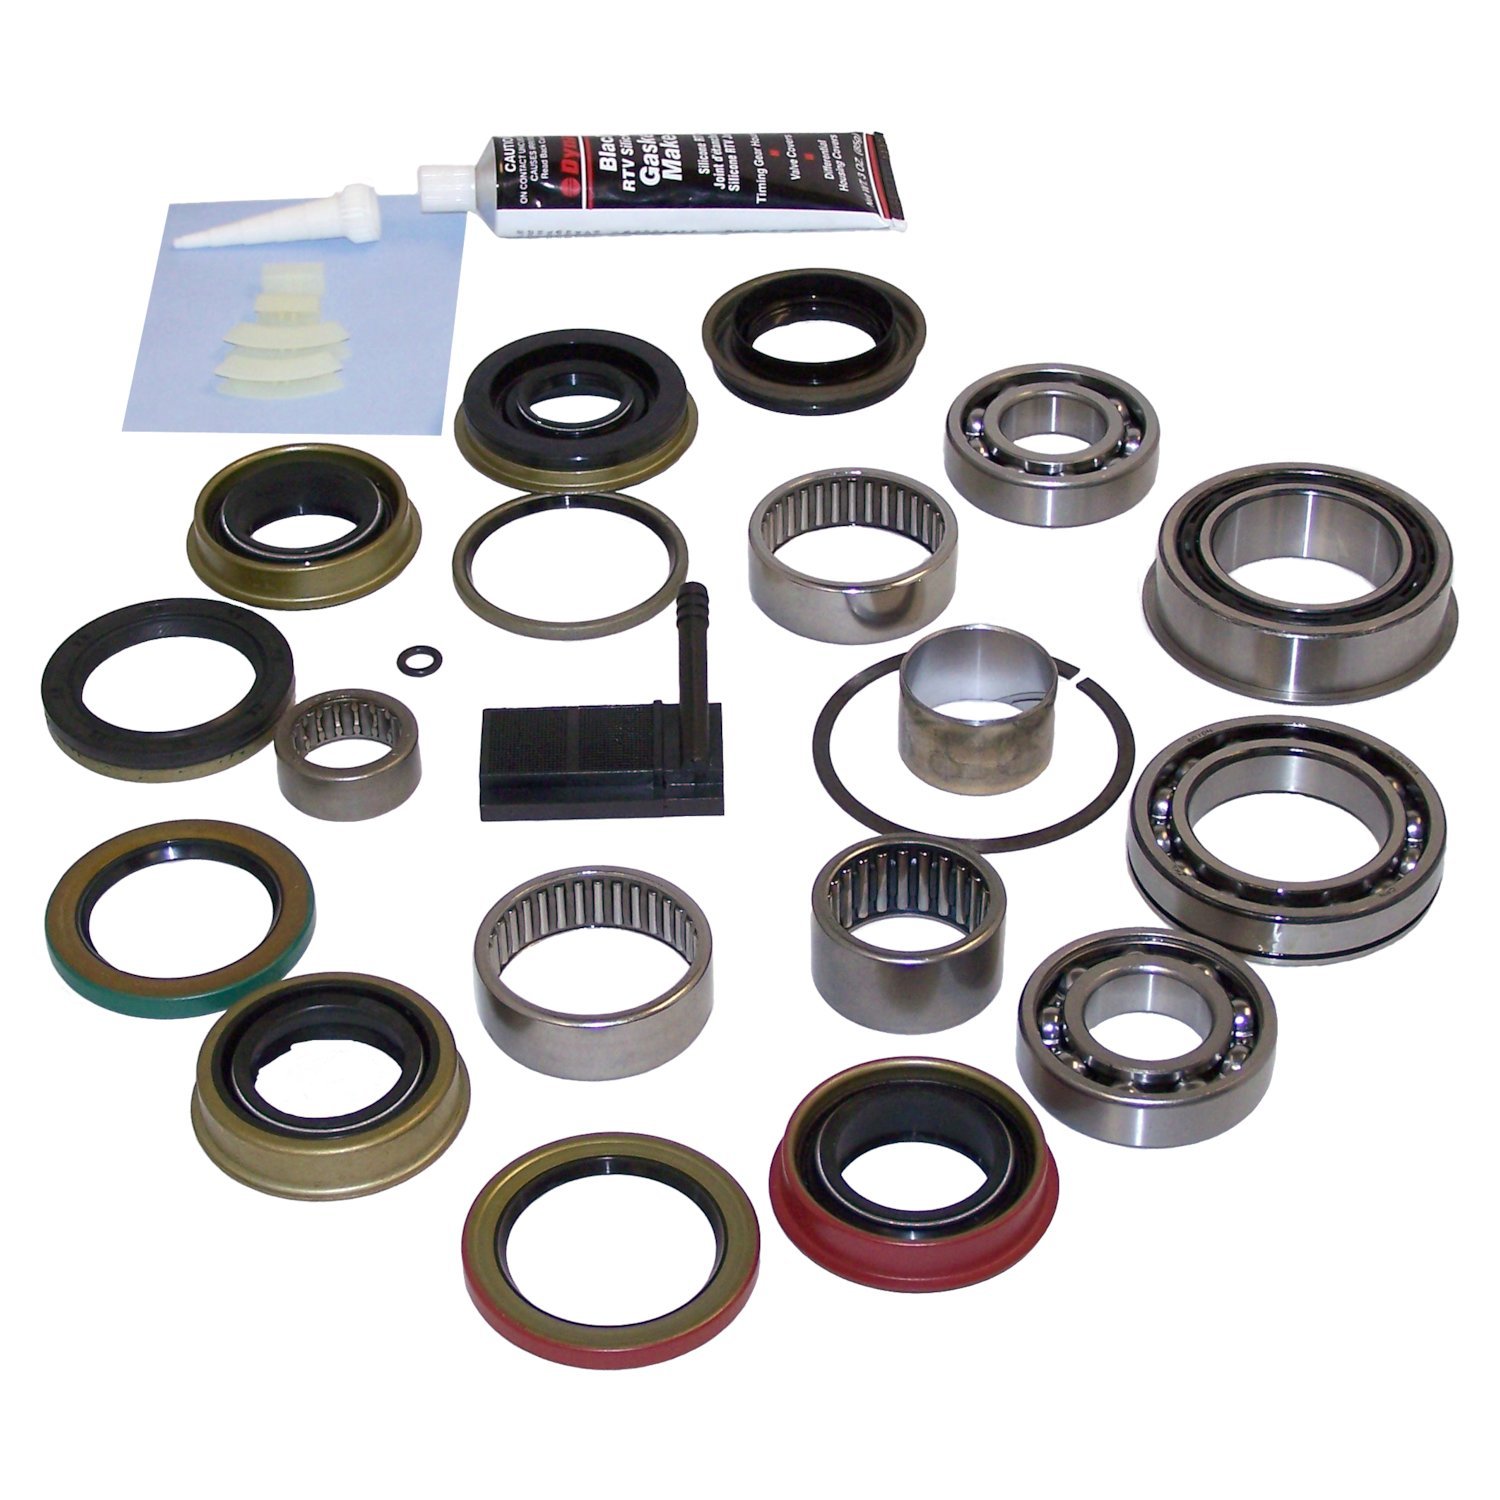 Transfer Case Overhaul Kit; Incl. Bearings/Seals/Filter And Fork Inserts;